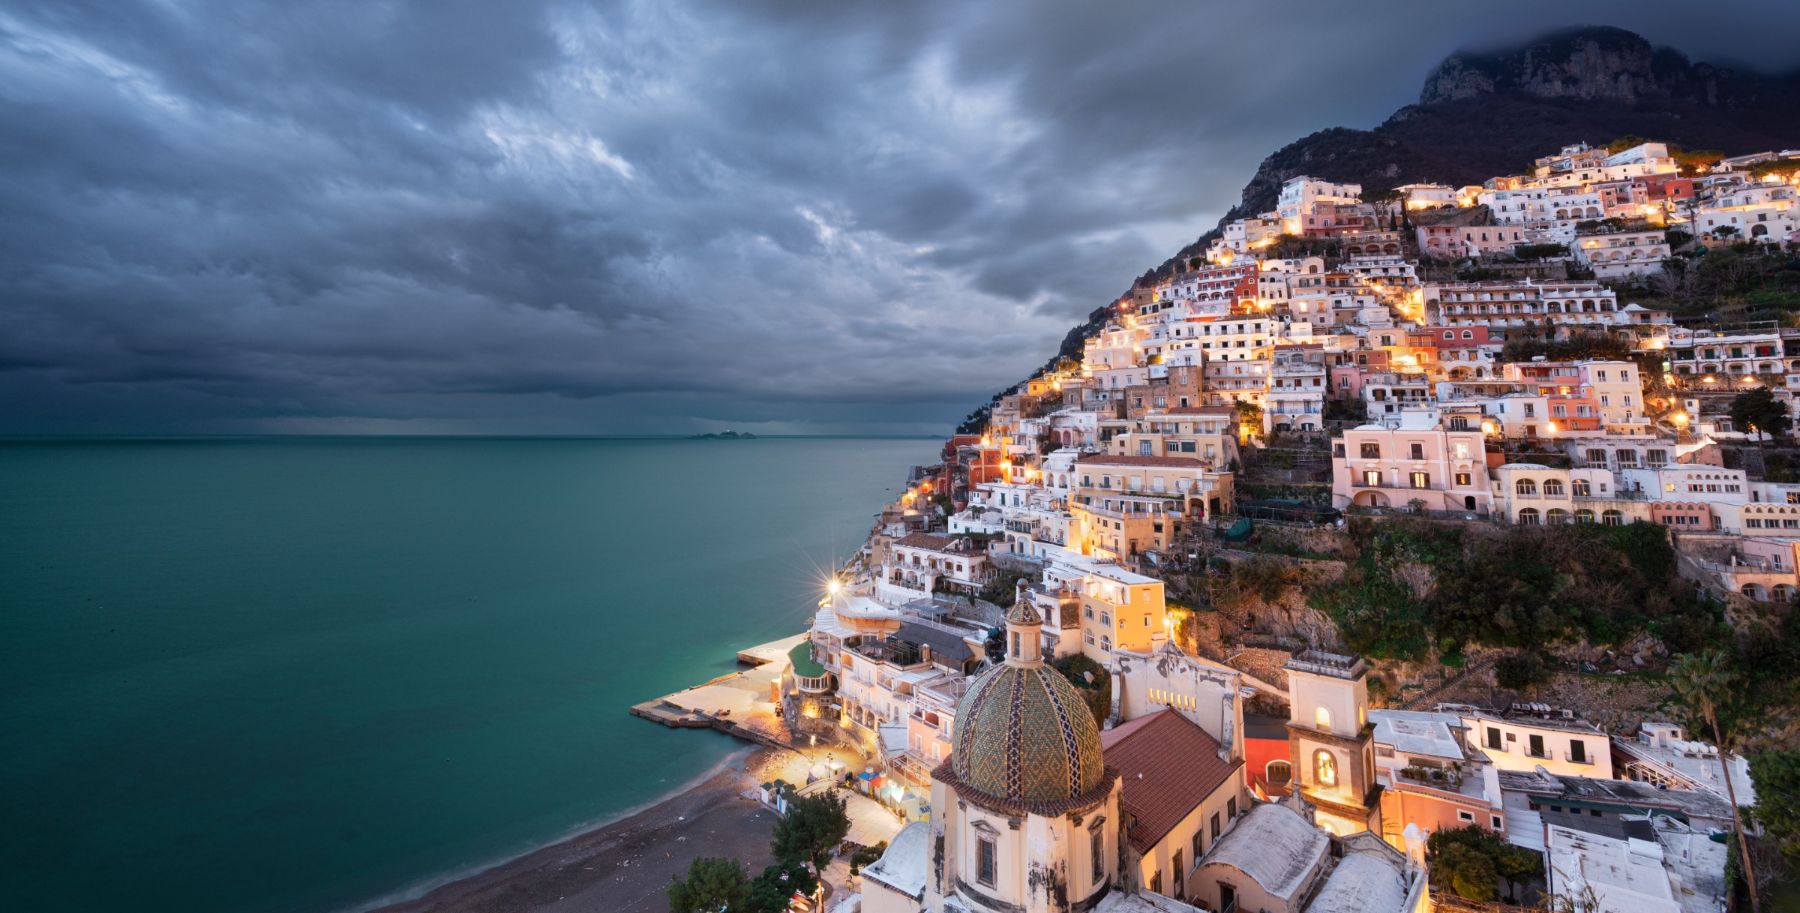 Positano, Italy: 7 Things to See and Do Including Lifestyle Information